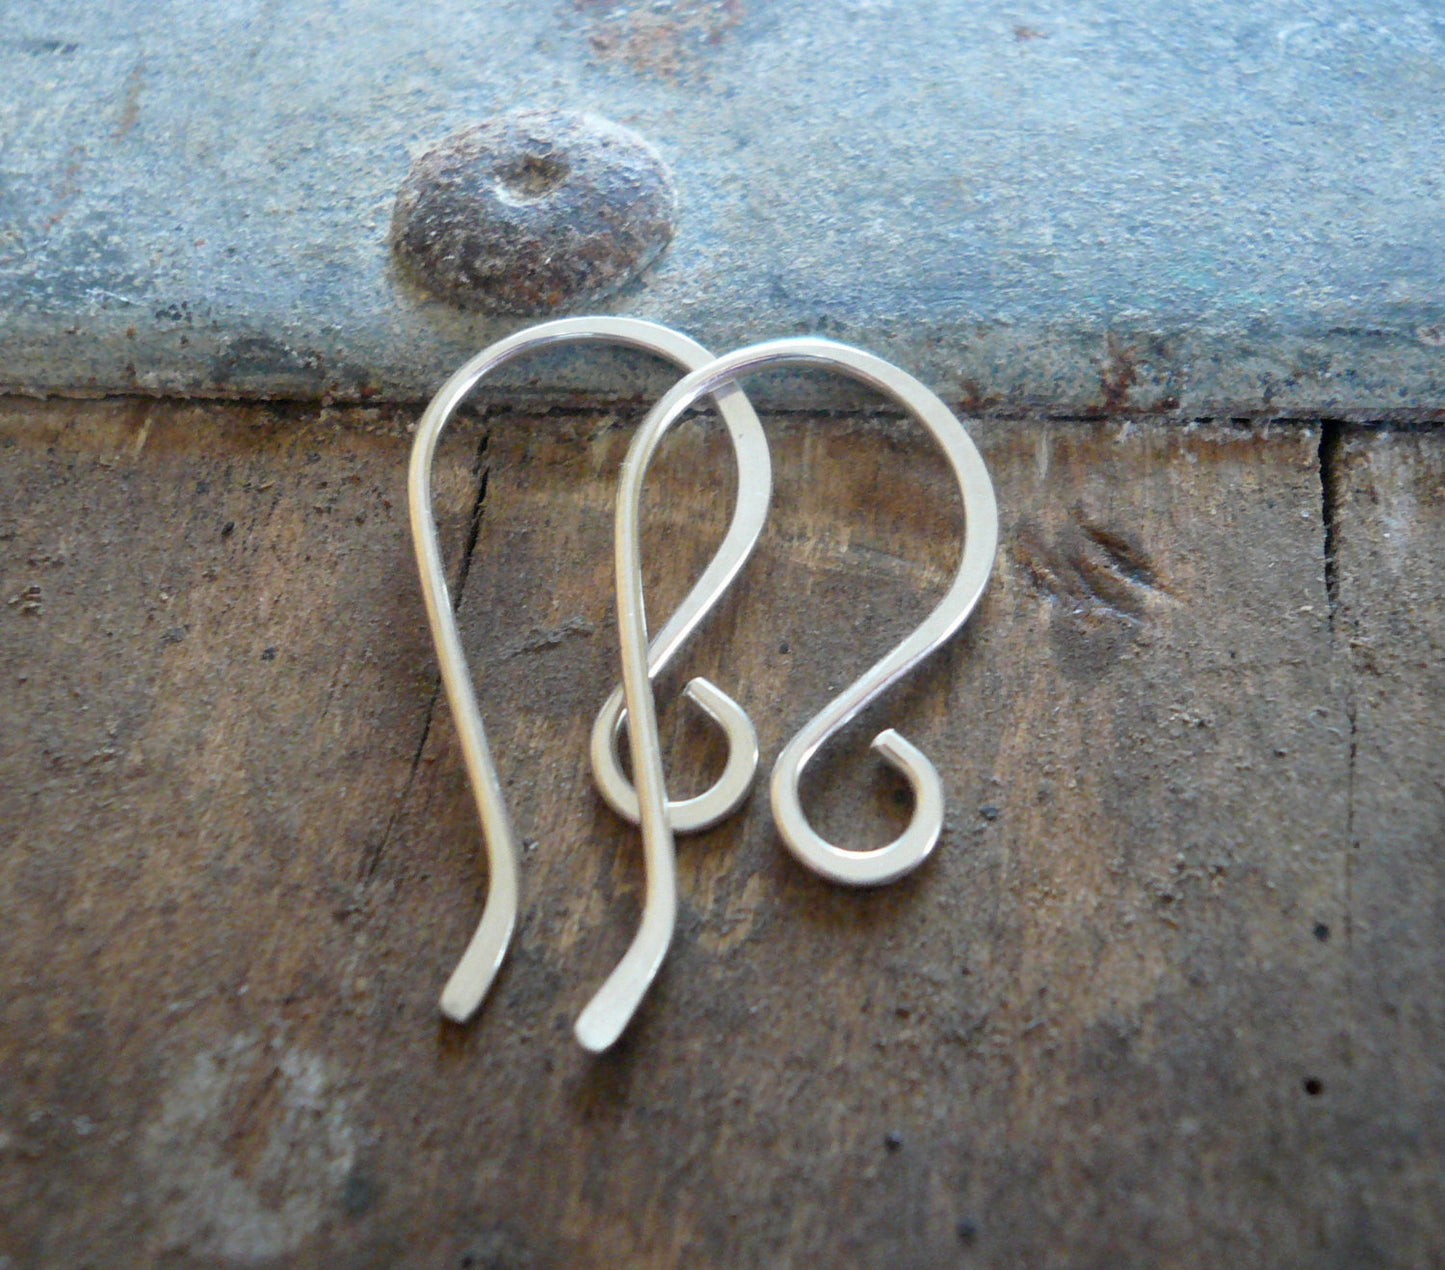 Dandy Sterling Silver Earwires - Handmade. Handforged. Shiny Finish. Made to Order